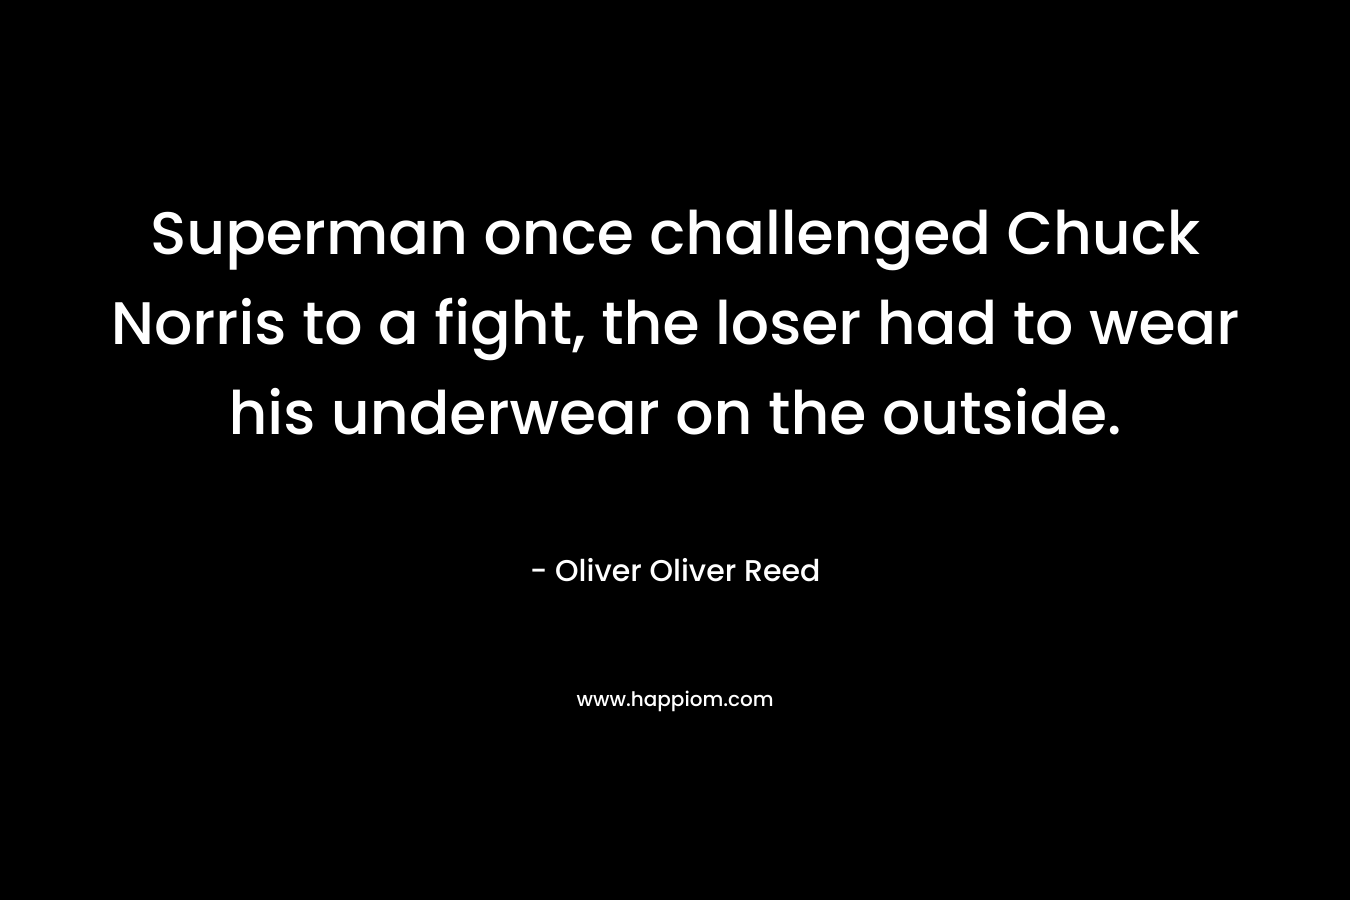 Superman once challenged Chuck Norris to a fight, the loser had to wear his underwear on the outside. – Oliver Oliver Reed